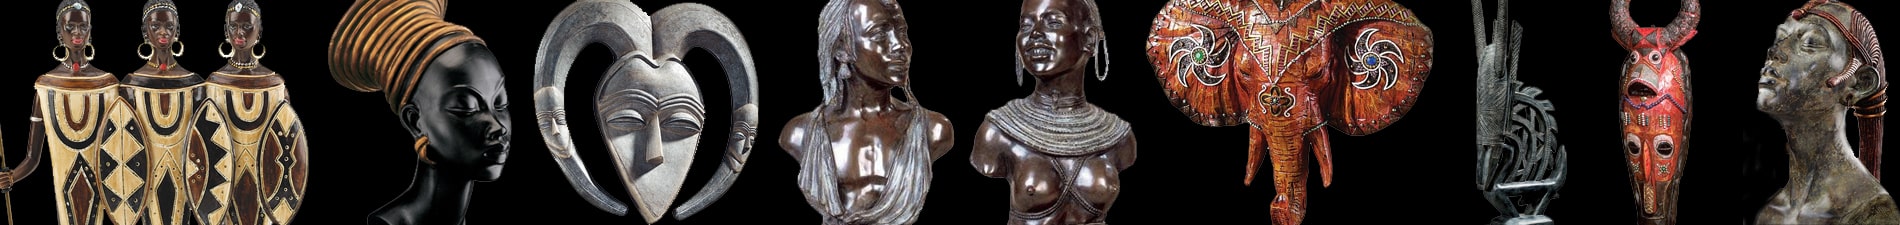 African Art Reproductions